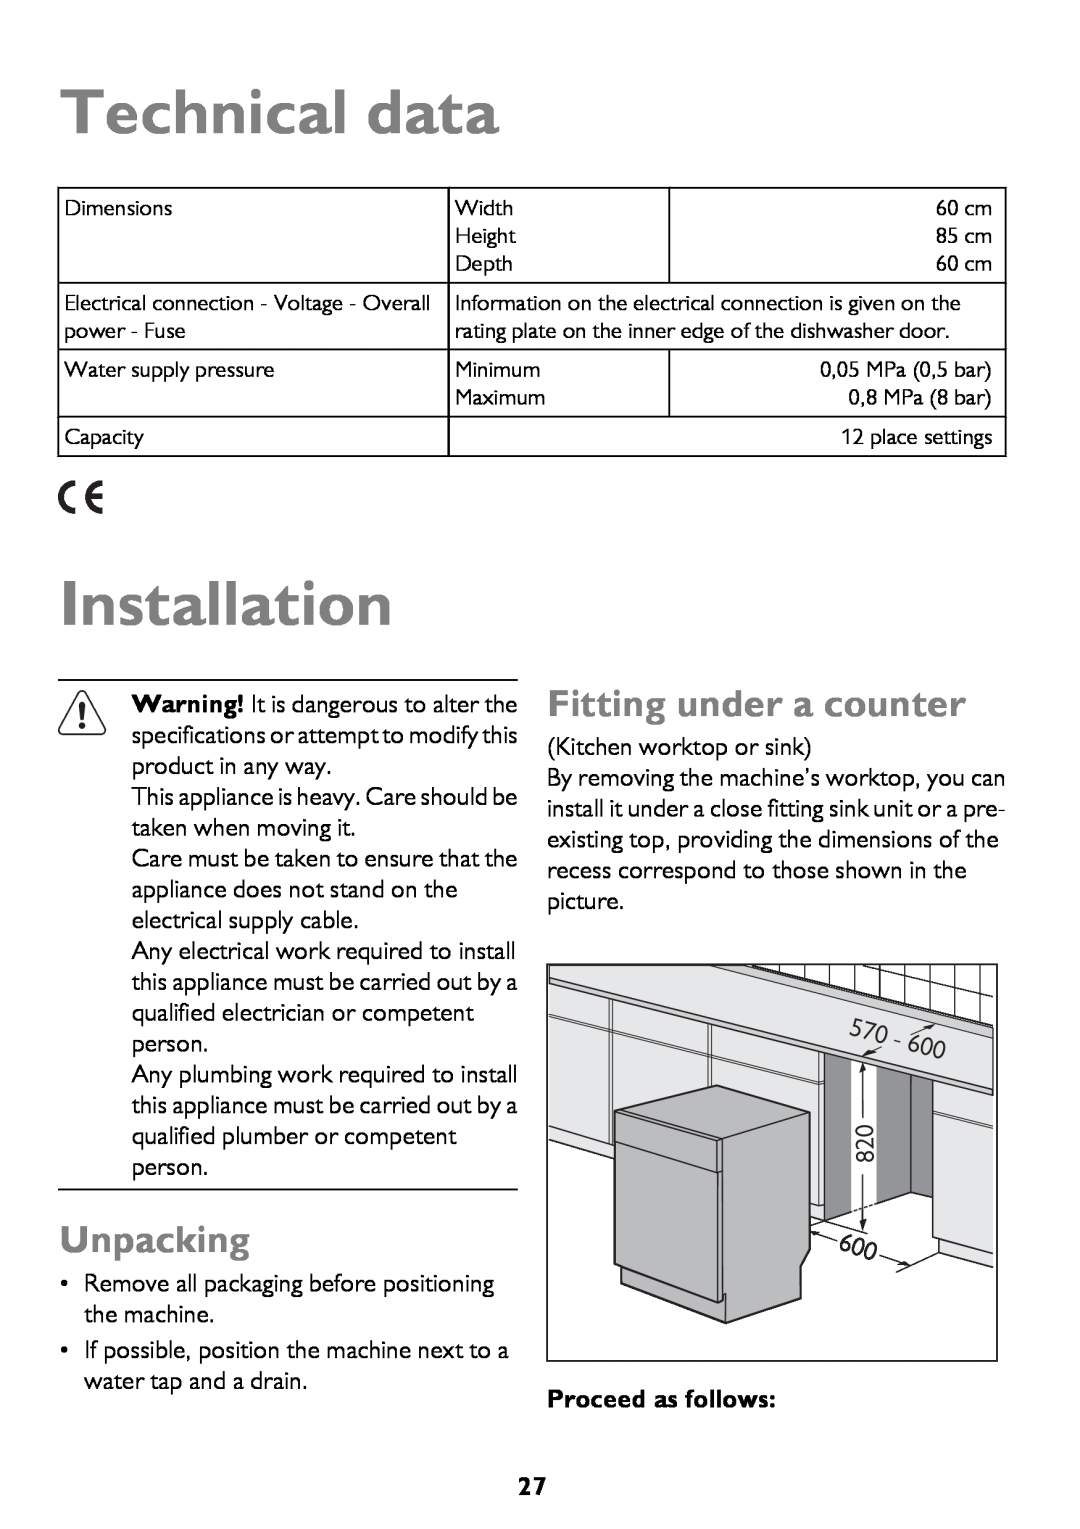 John Lewis JLDWS1208 Technical data, Installation, Unpacking, Fitting under a counter, Proceed as follows 